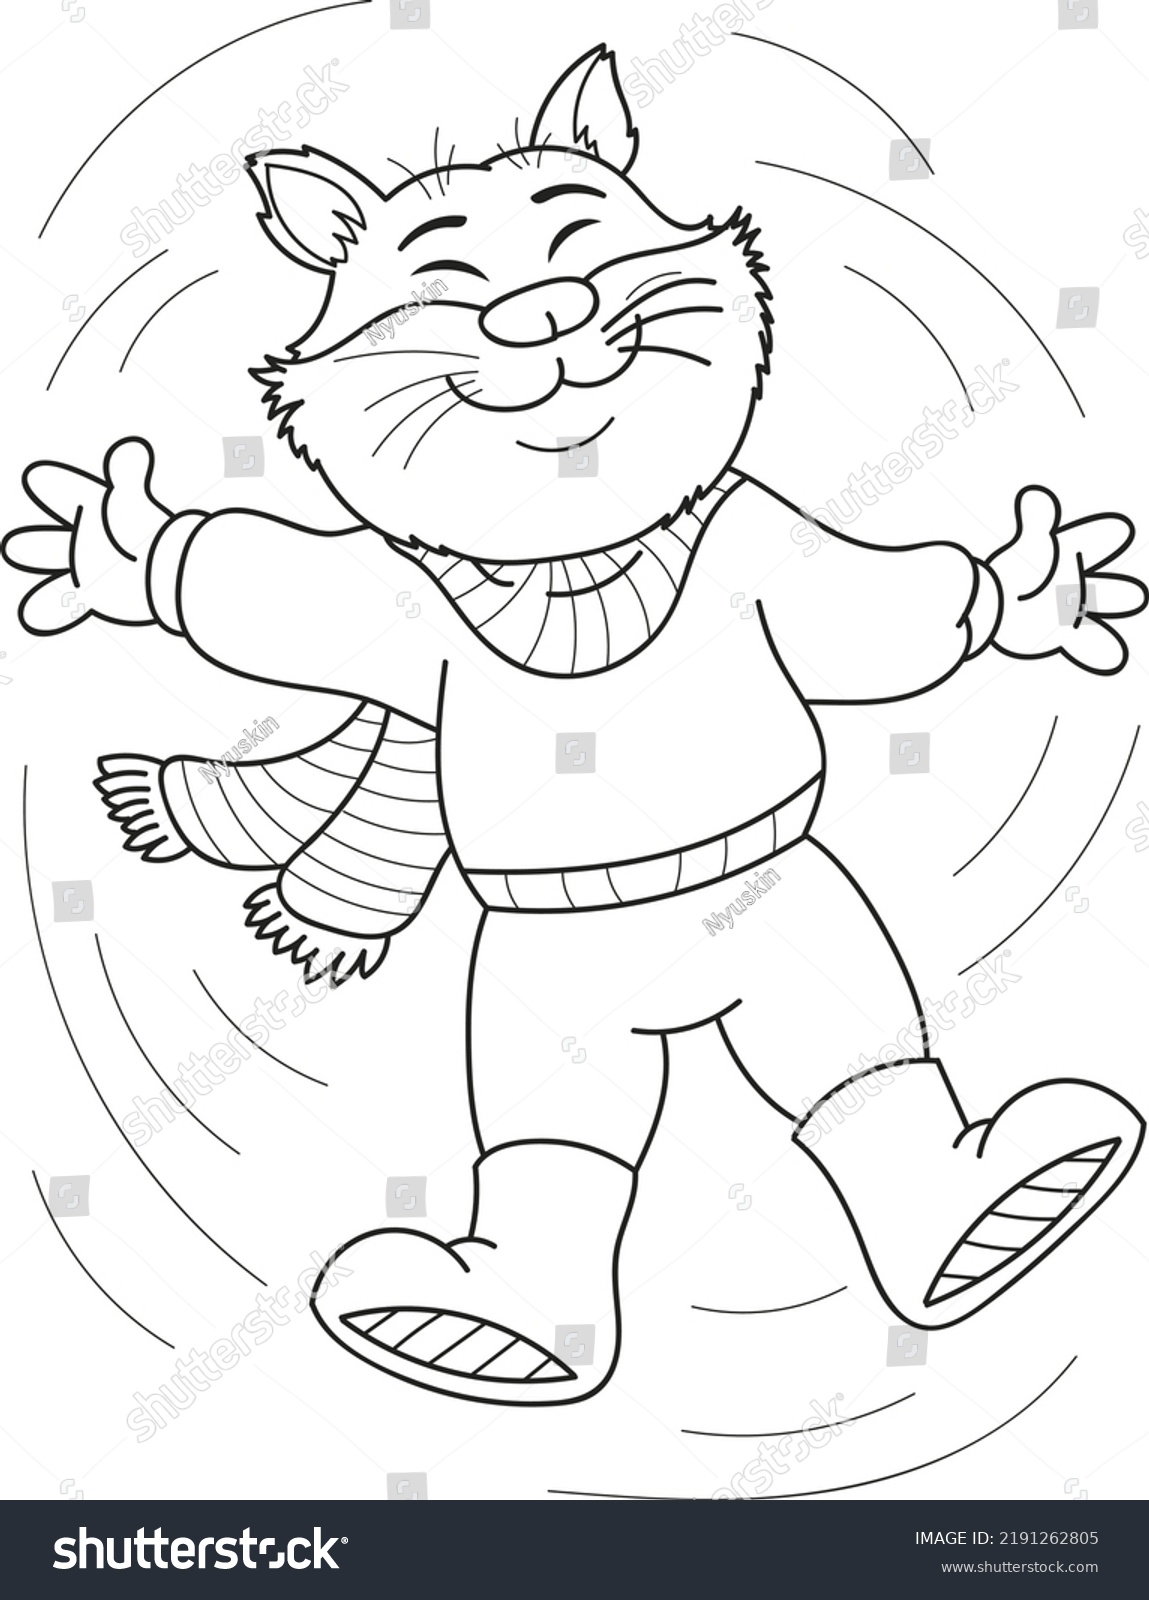 Coloring Page Outline Cartoon Smiling Cute Stock Vector (Royalty Free ...